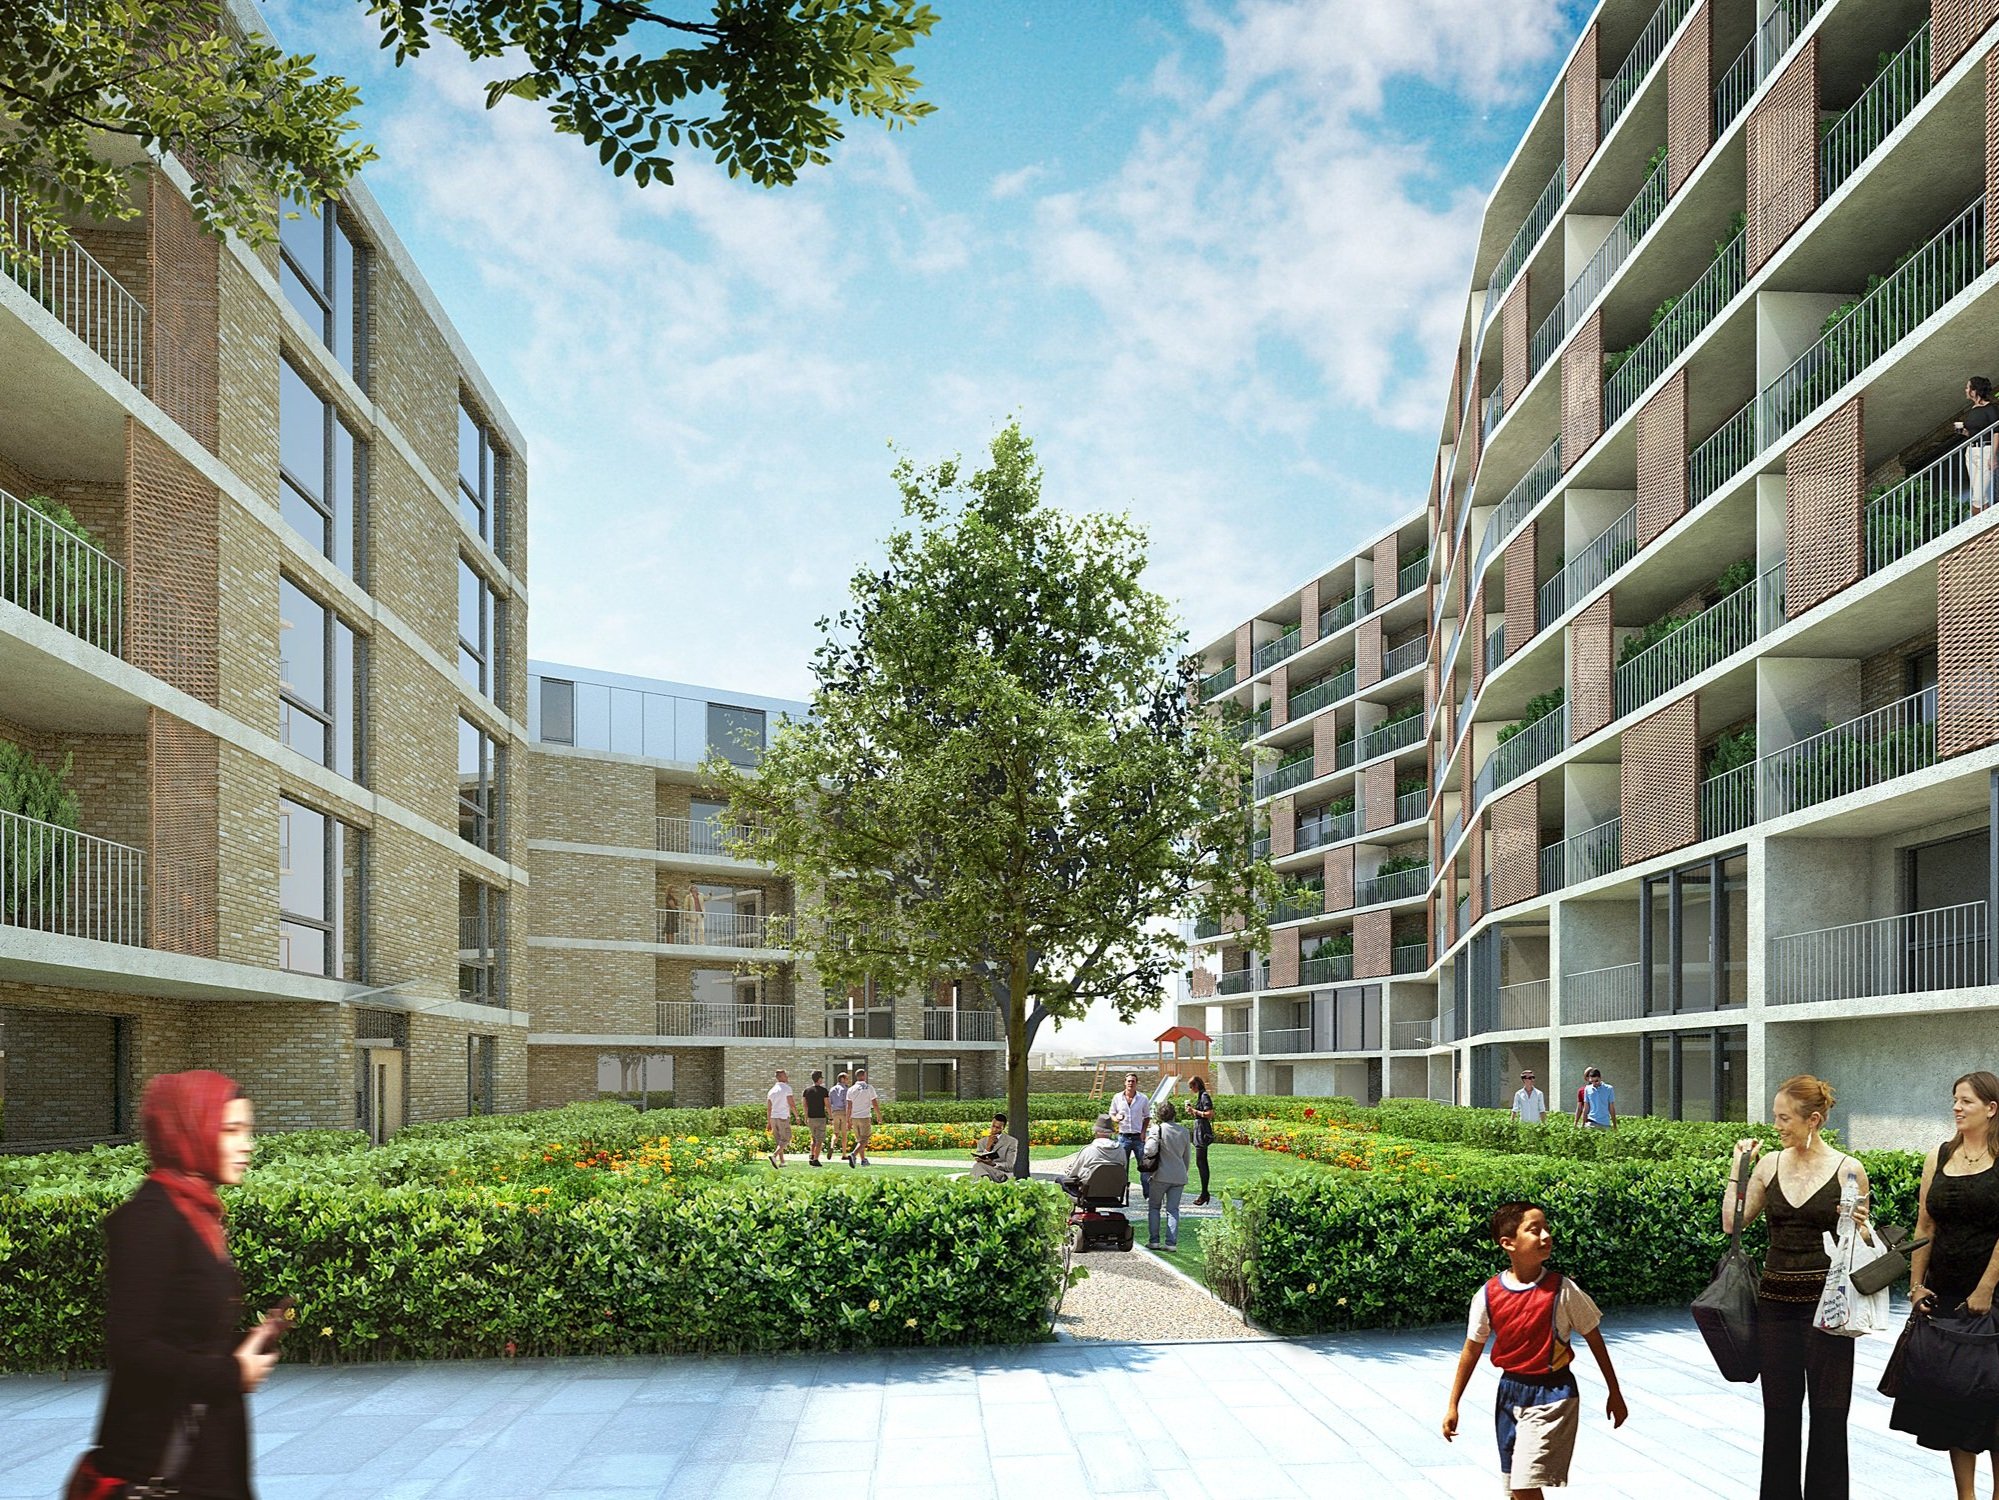 01+-+Mixed+use+-+Camberwell+-+London-+Courtyard+Landscape+Multistorey+Residential.jpg